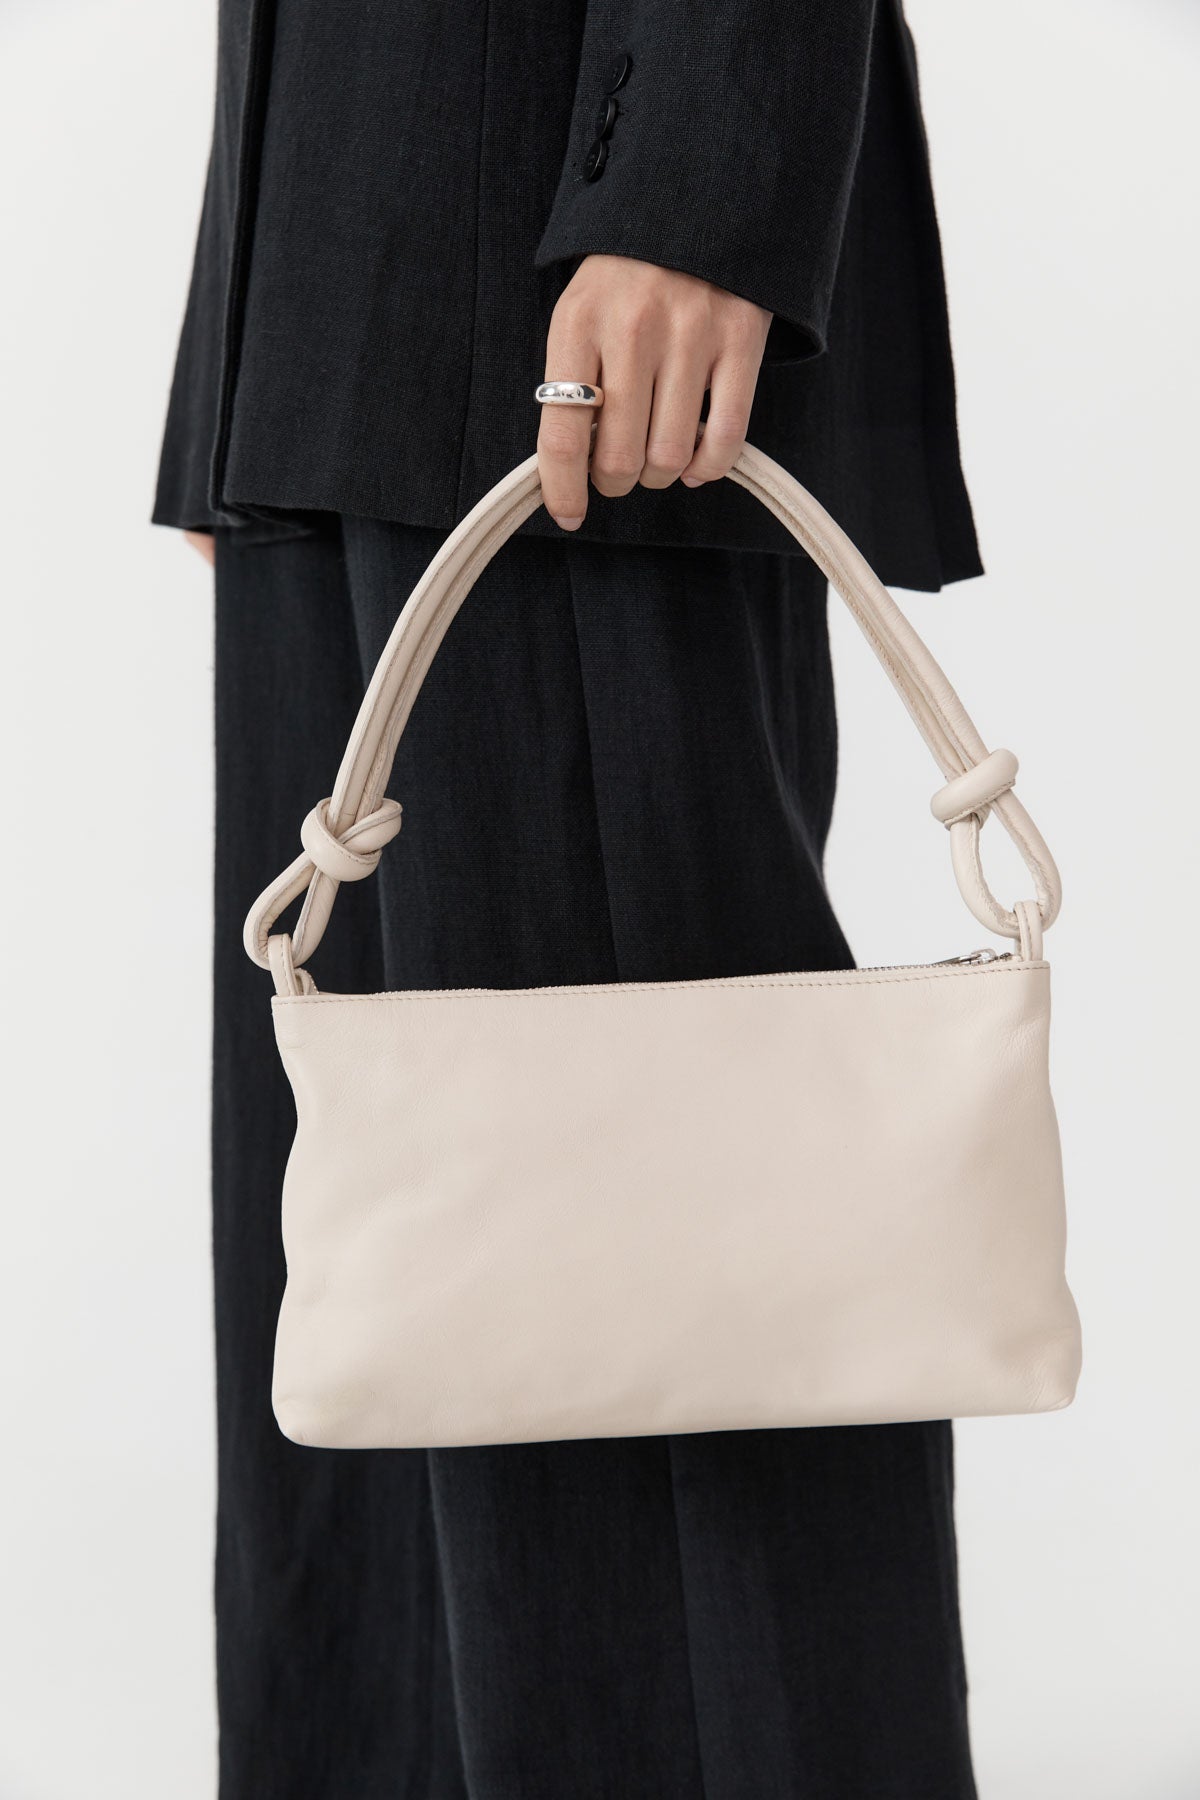 Knotted Baguette Bag - Cool White